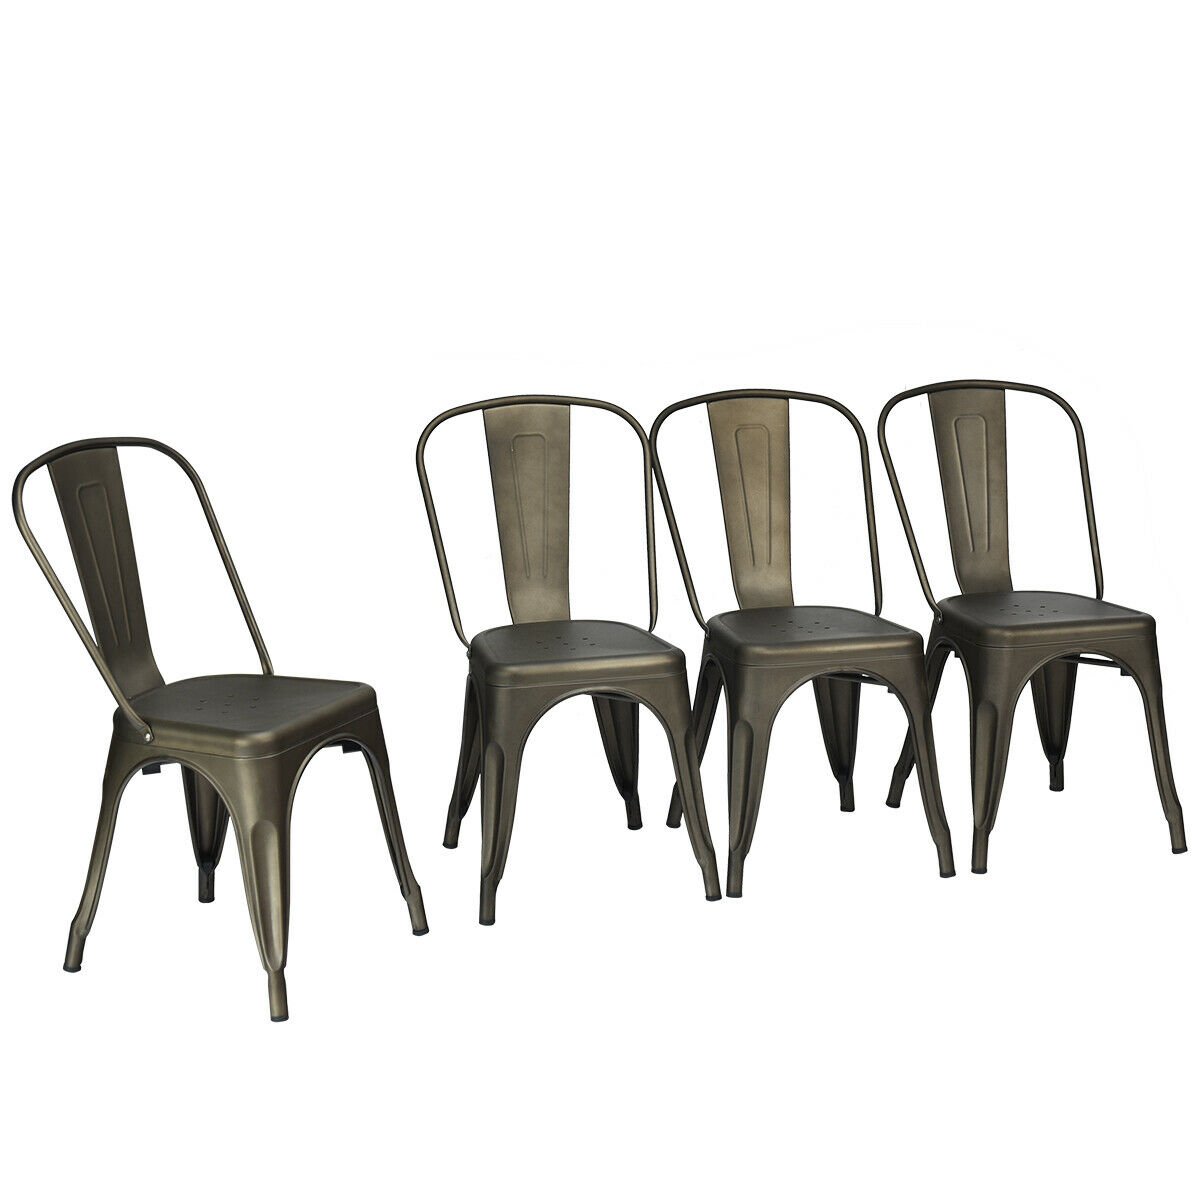 Set Of 4 Metal Dining Chair Stackable Tolix Bar Cafe Side Chair Gun